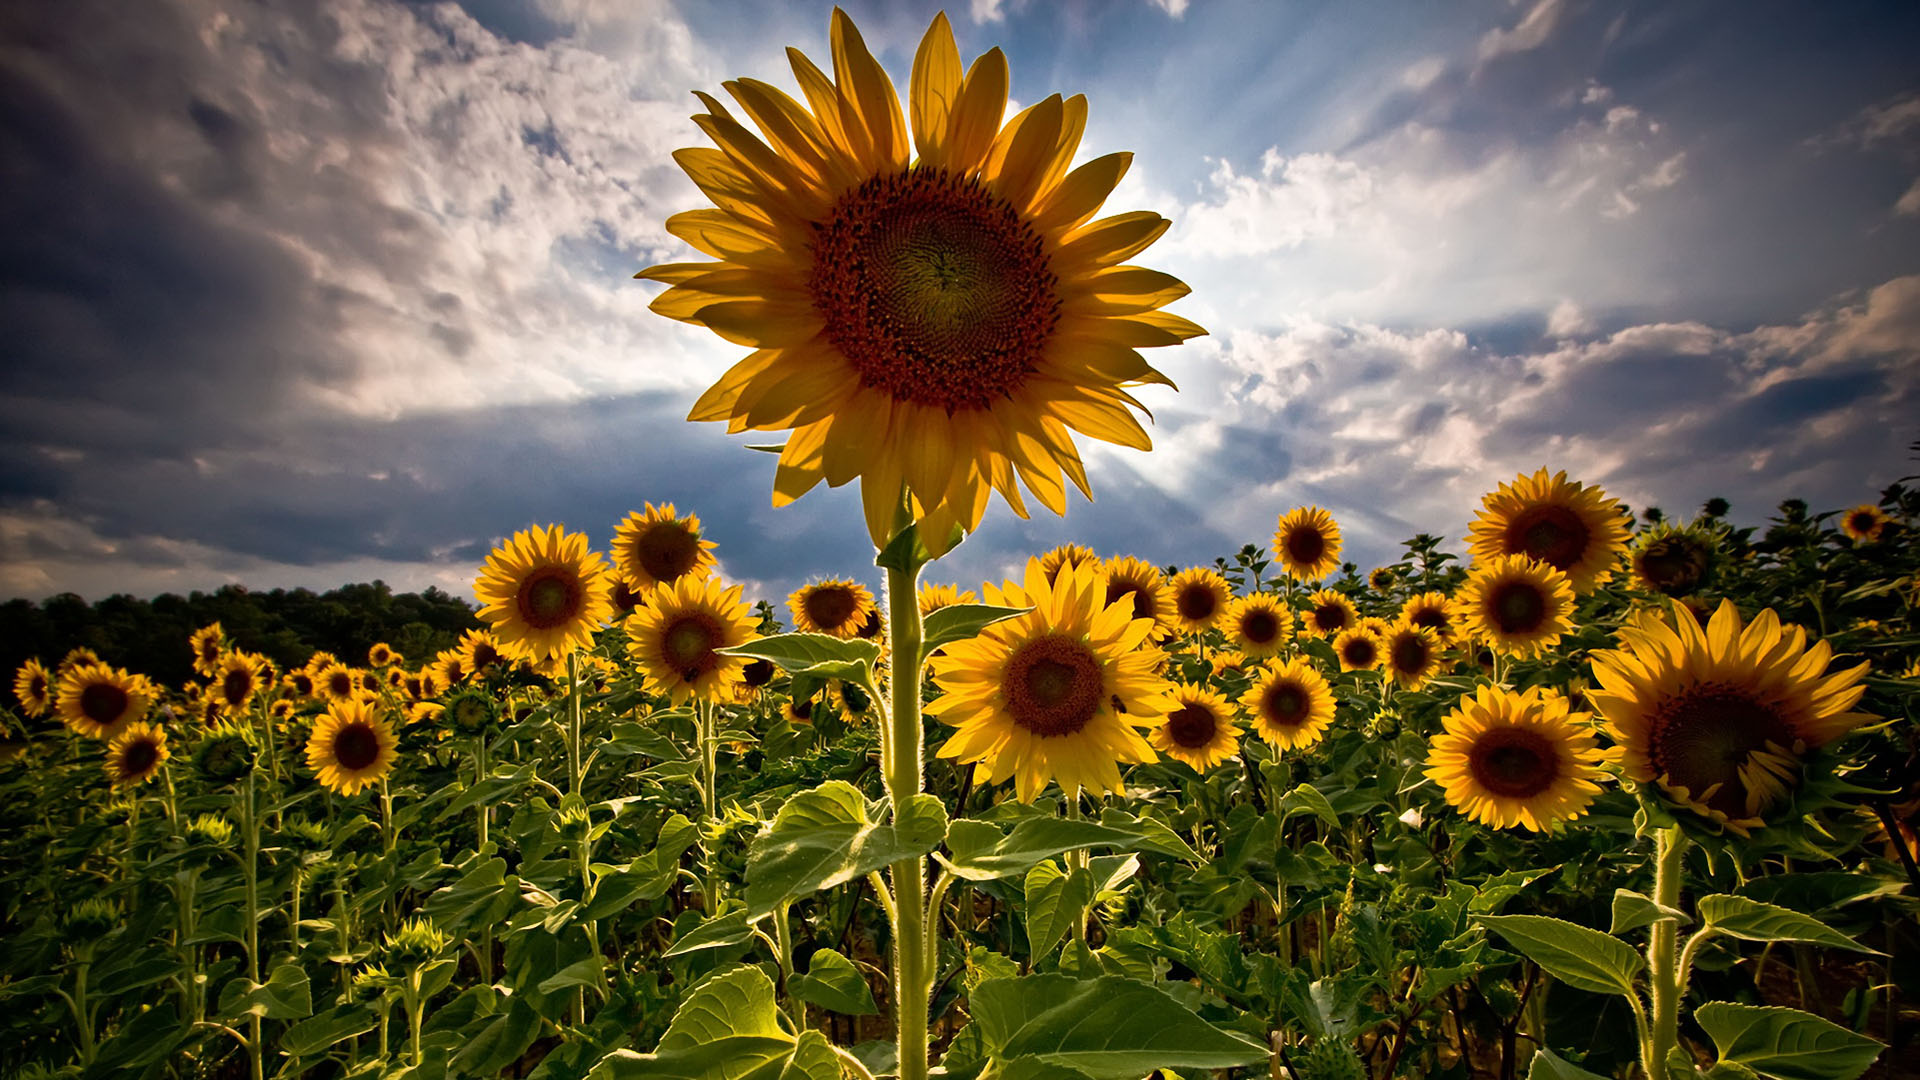 General 1920x1080 sunflowers HDR clouds closeup